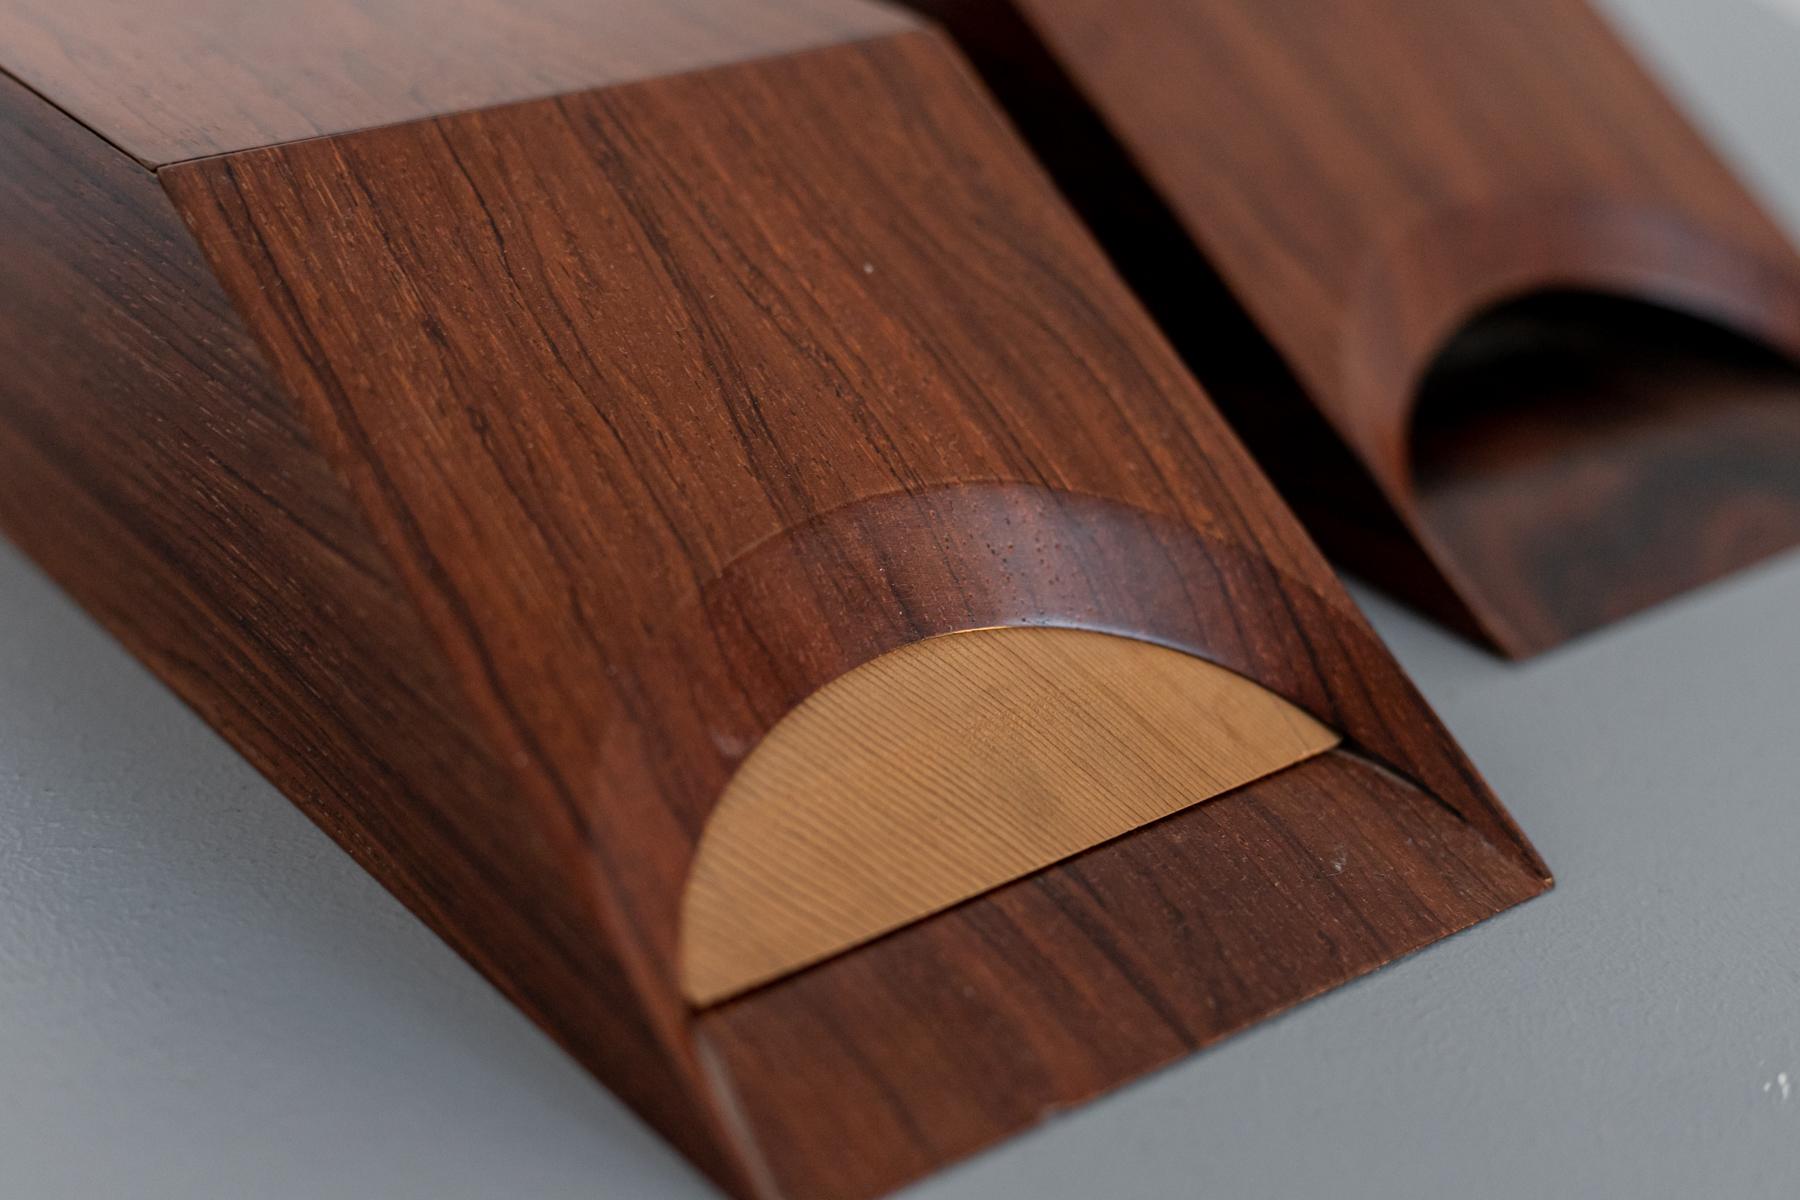 Very elegant fine wood vintage paper holder designed and made by master cabinetmaker Pierluigi Ghianda in 1970.
The vintage paper holder has a trapezoidal shape, with very hard lines and is totally made of wood, in two different colours, one darker